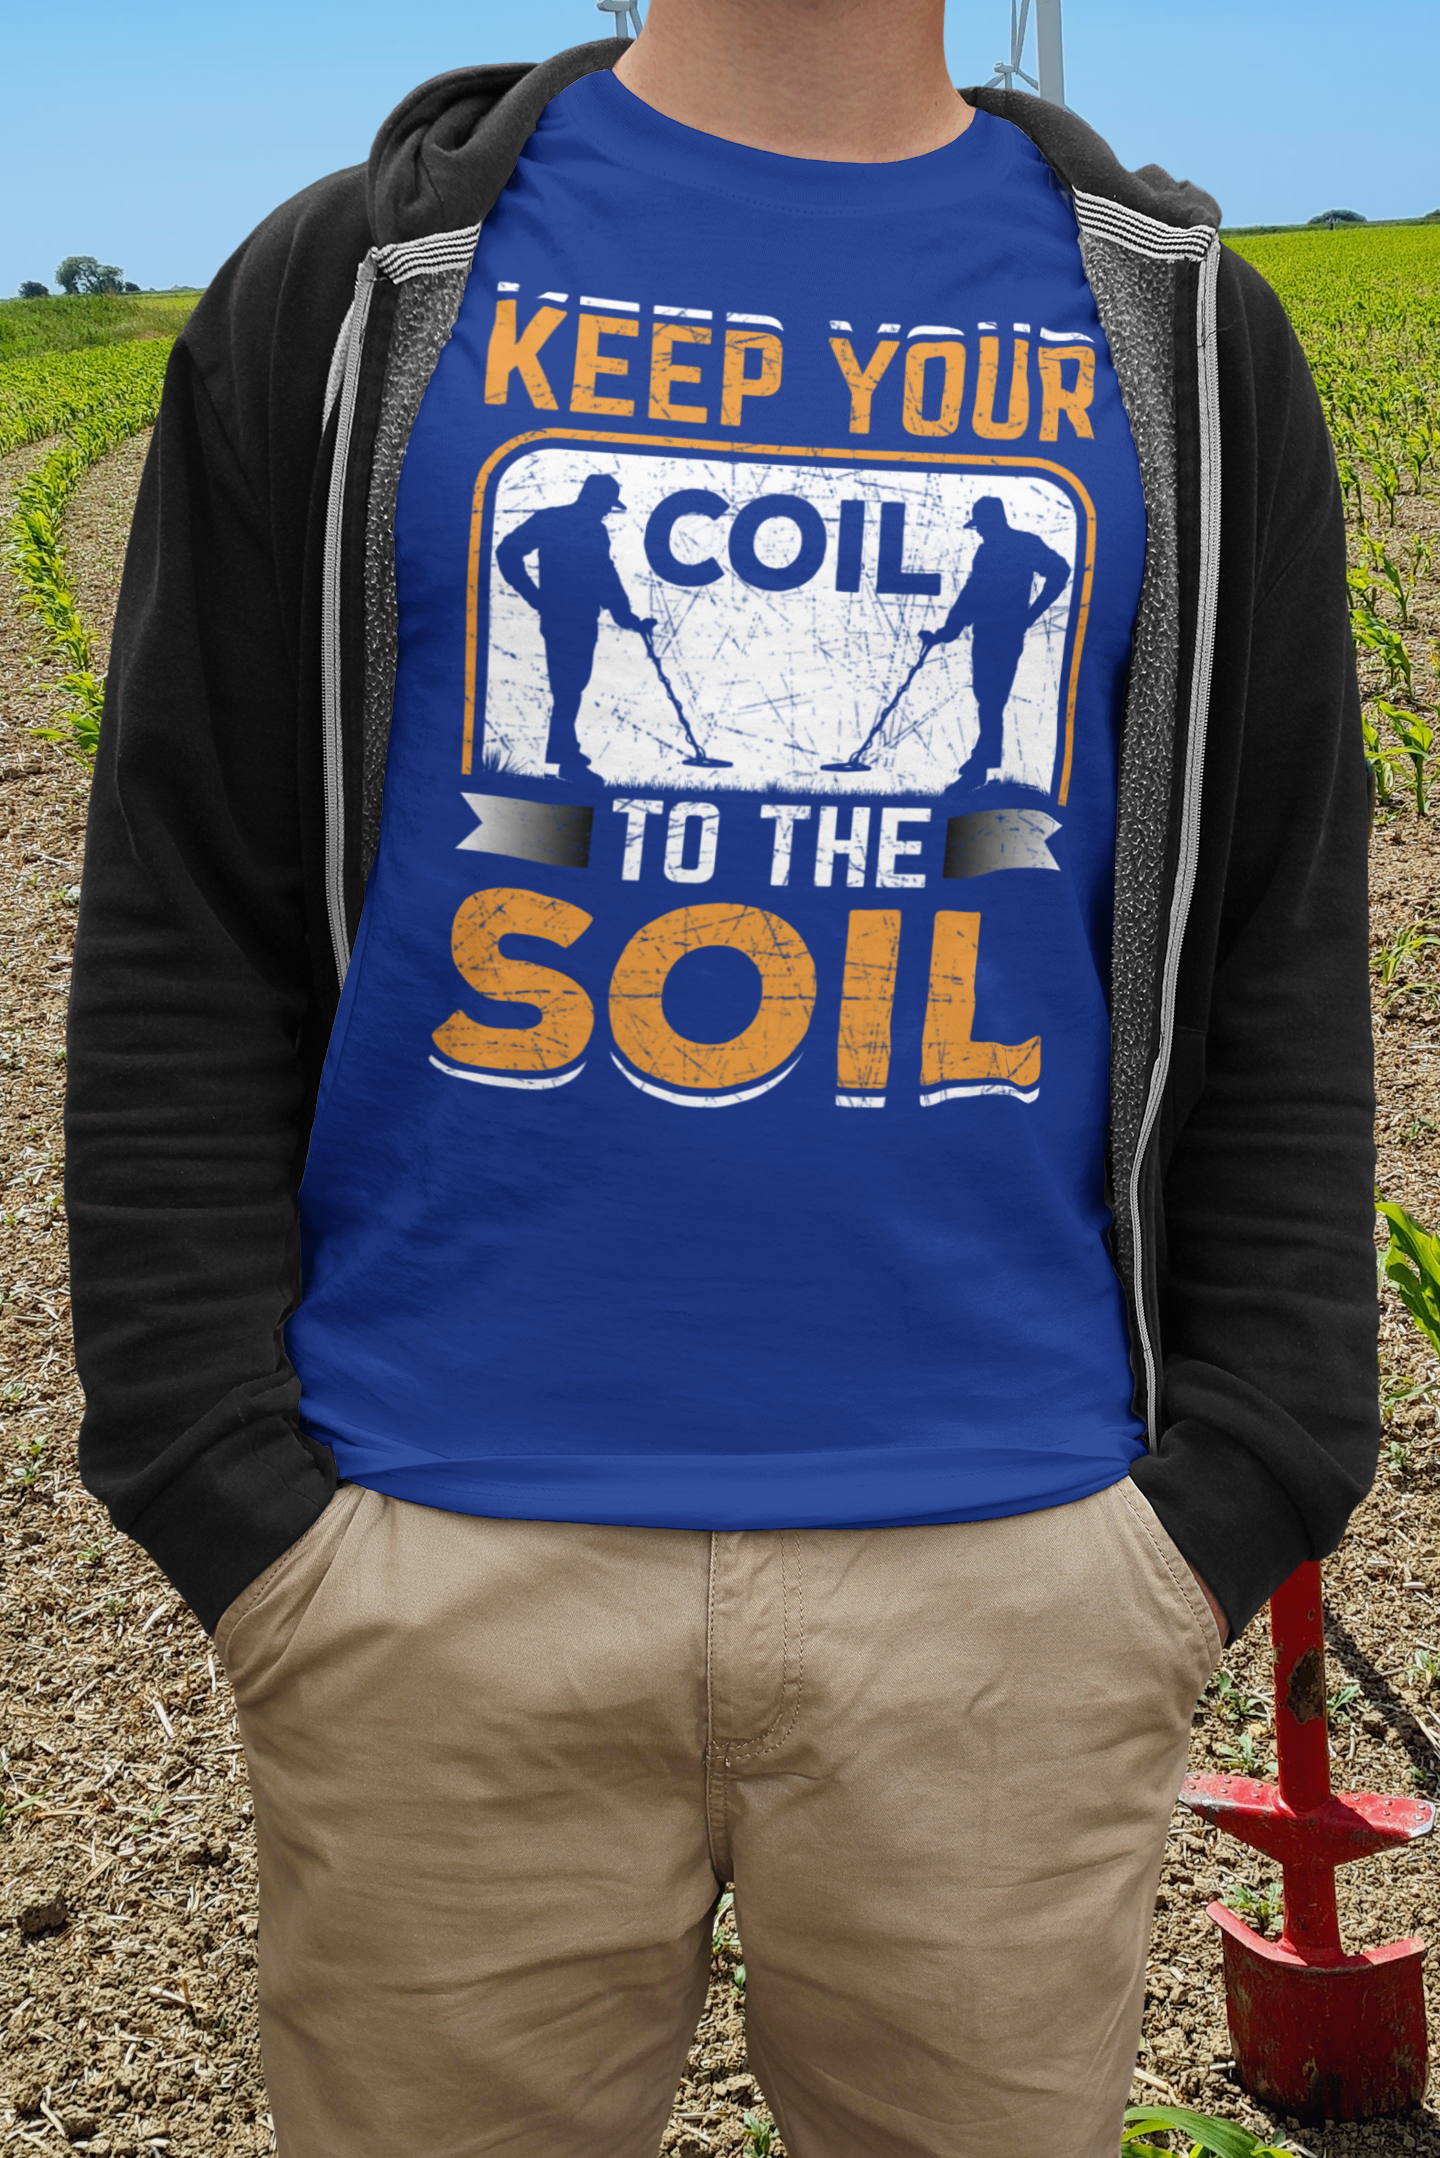 Keep your coil to the soil T-shirt